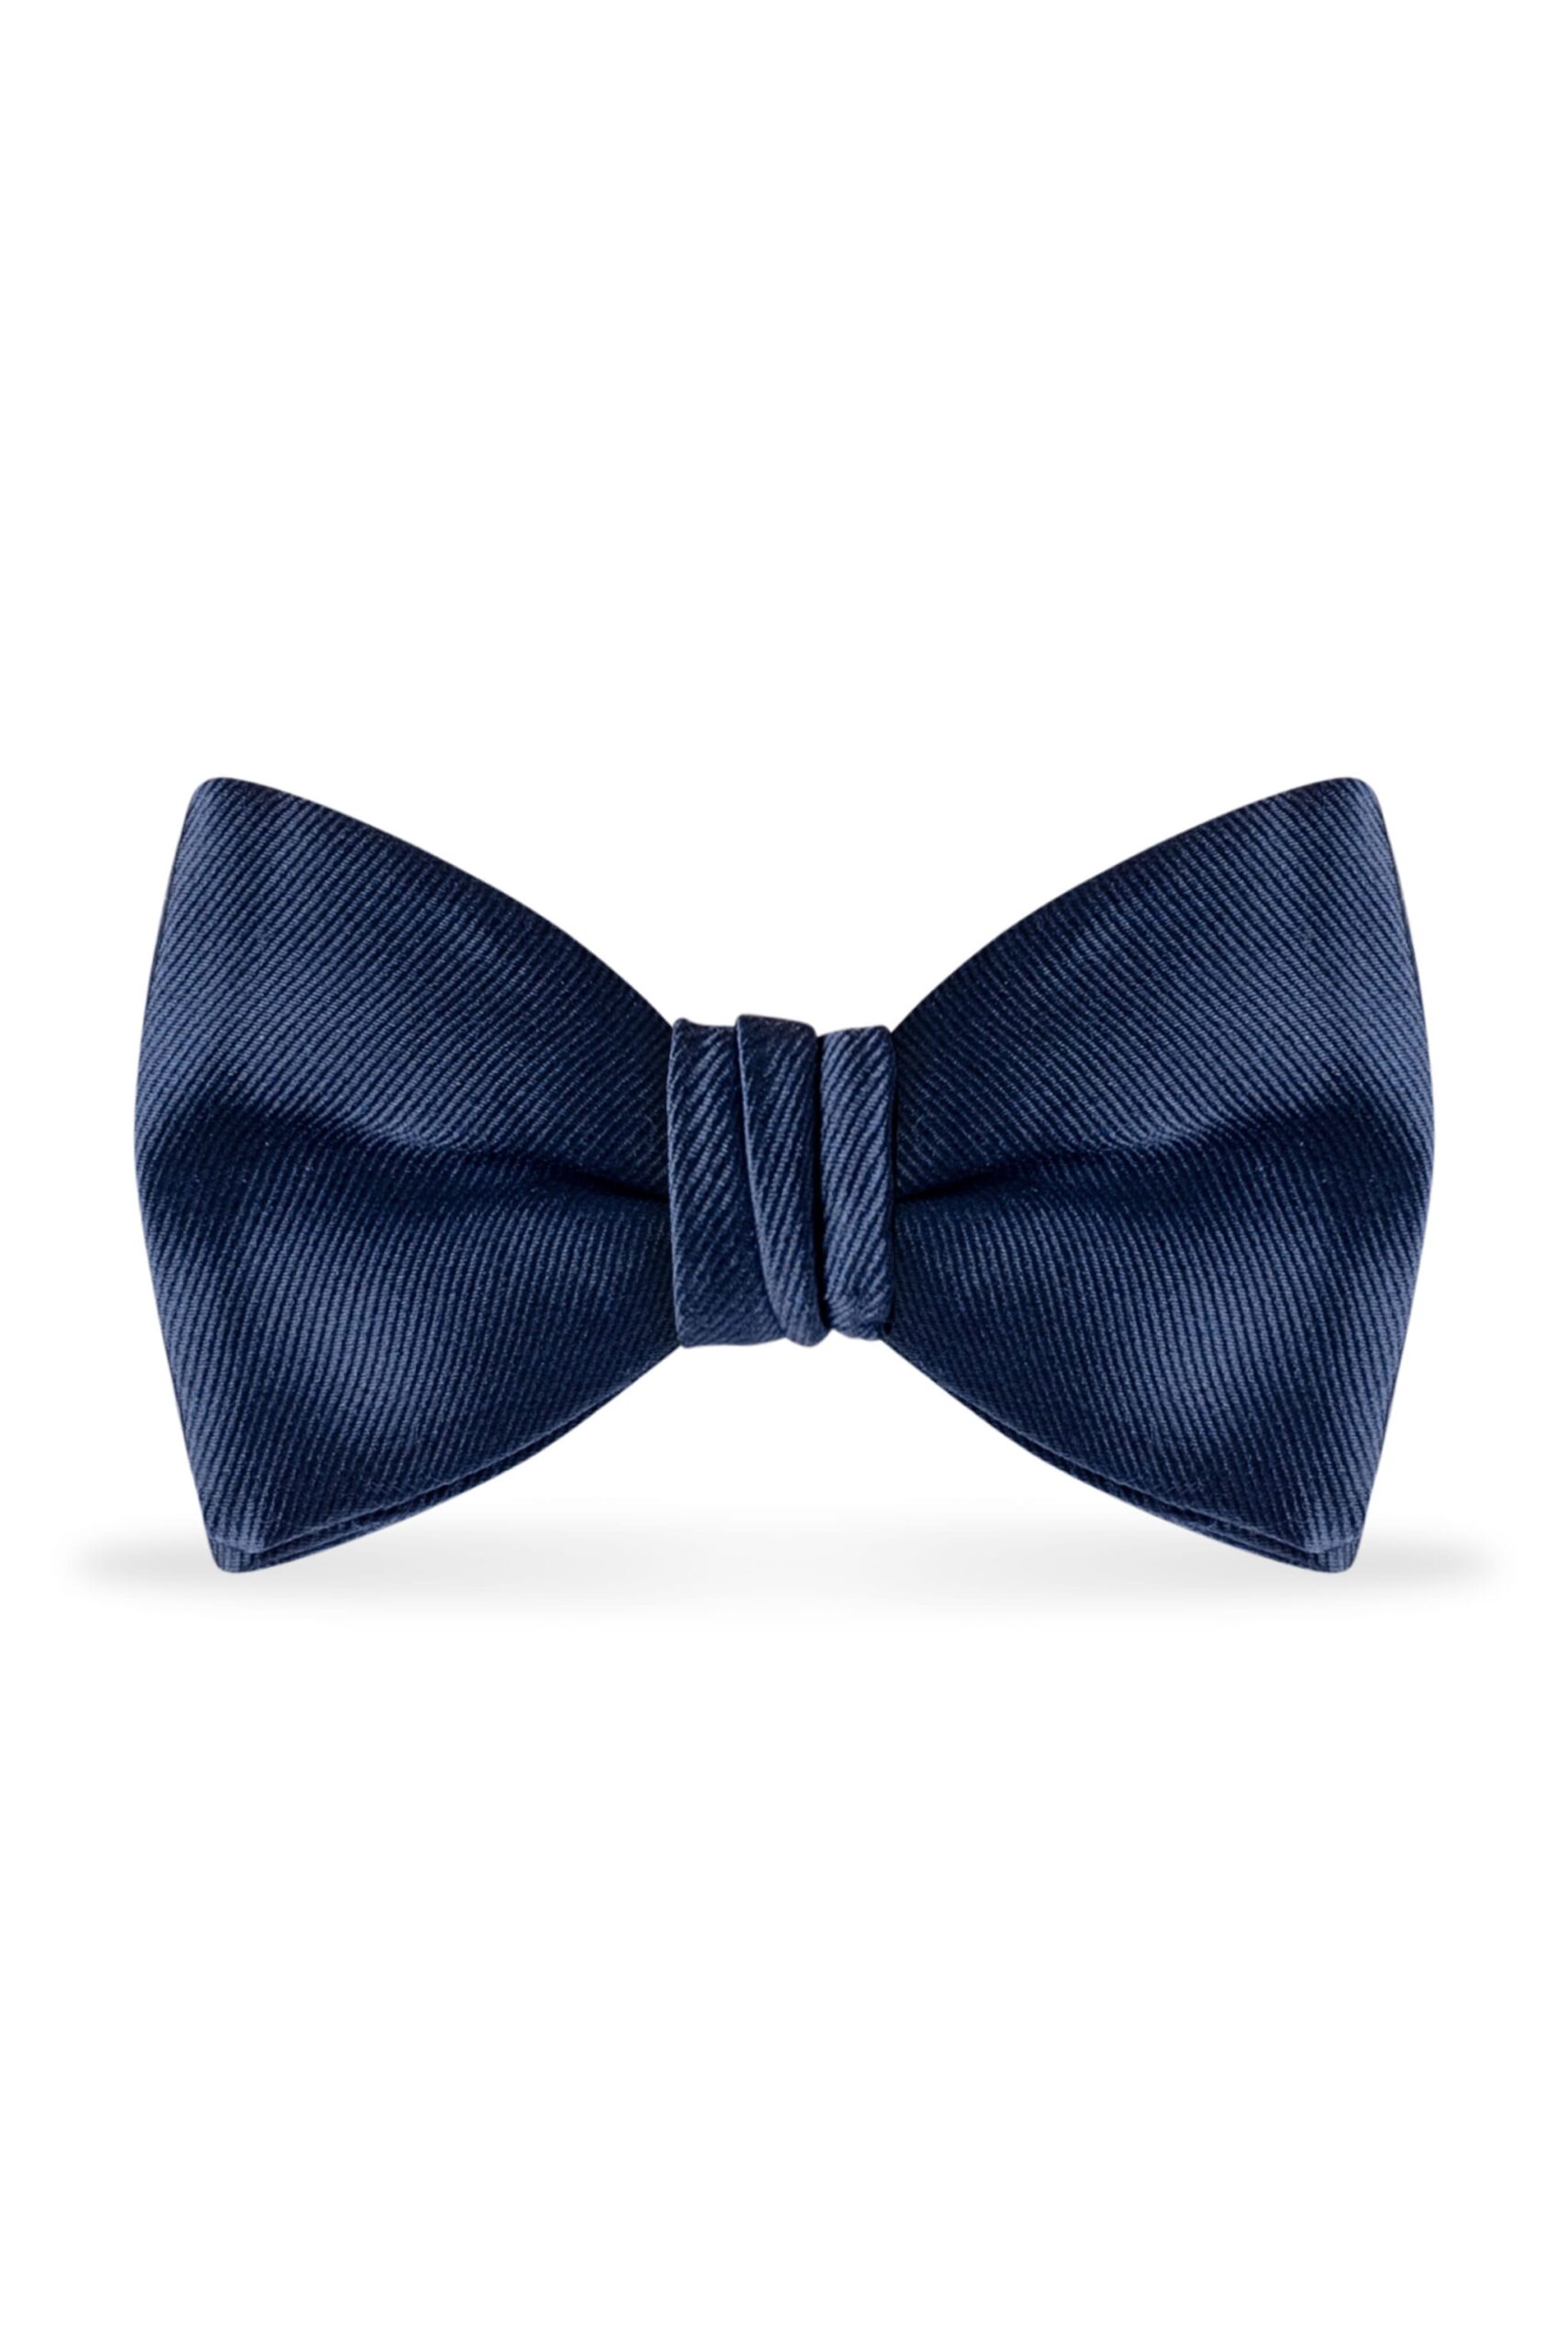 Solid Navy Bow Tie 1